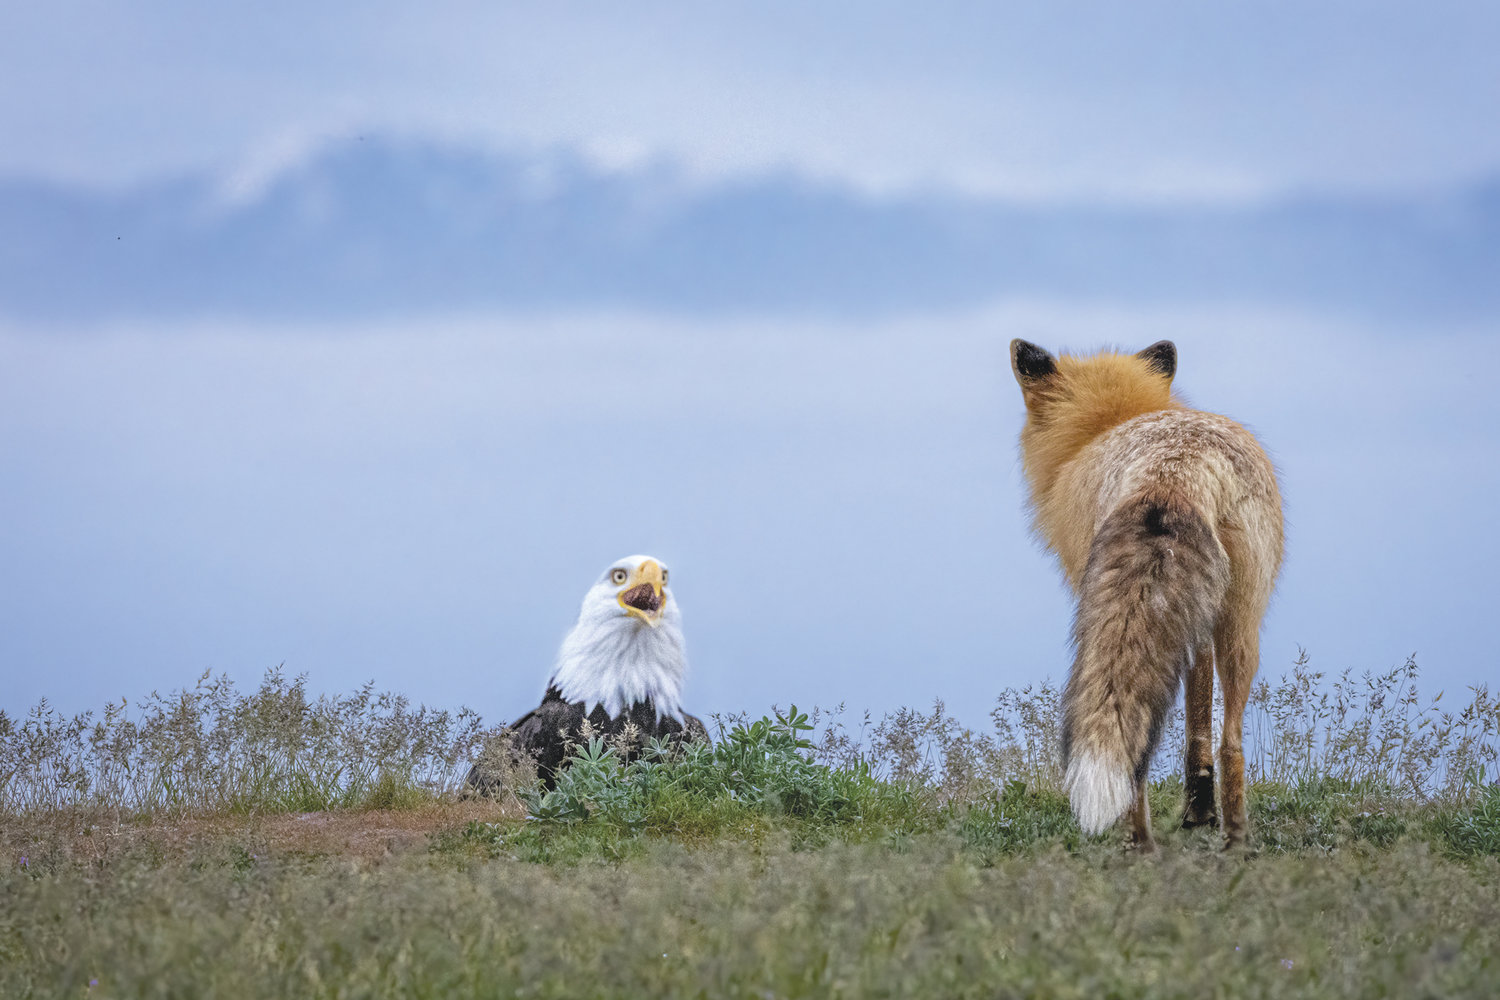 It’s hard to say whether the eagle or the fox was more surprised.